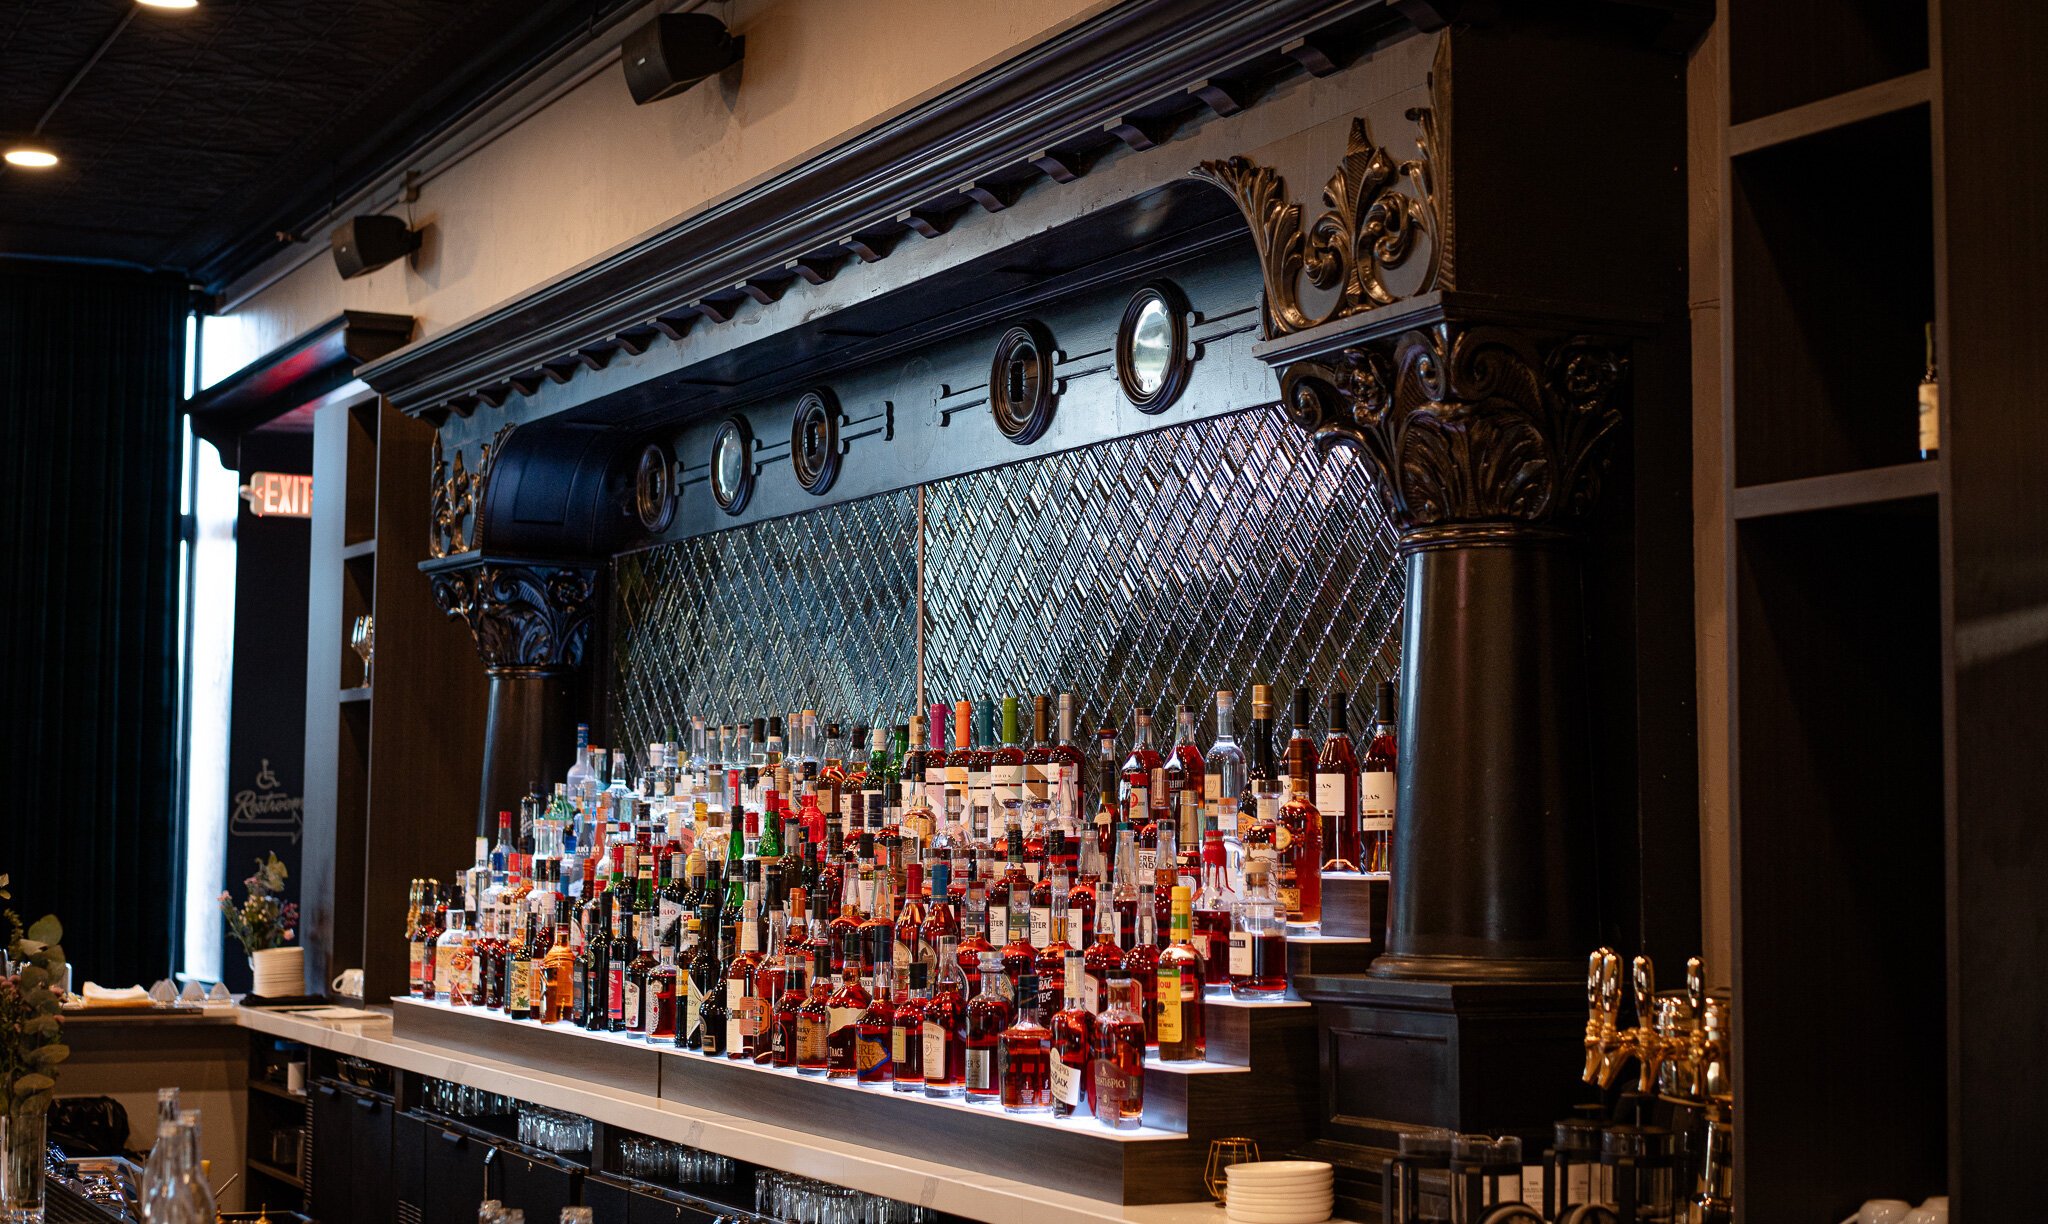 The refurbished back bar features woodworking details and green tiles.